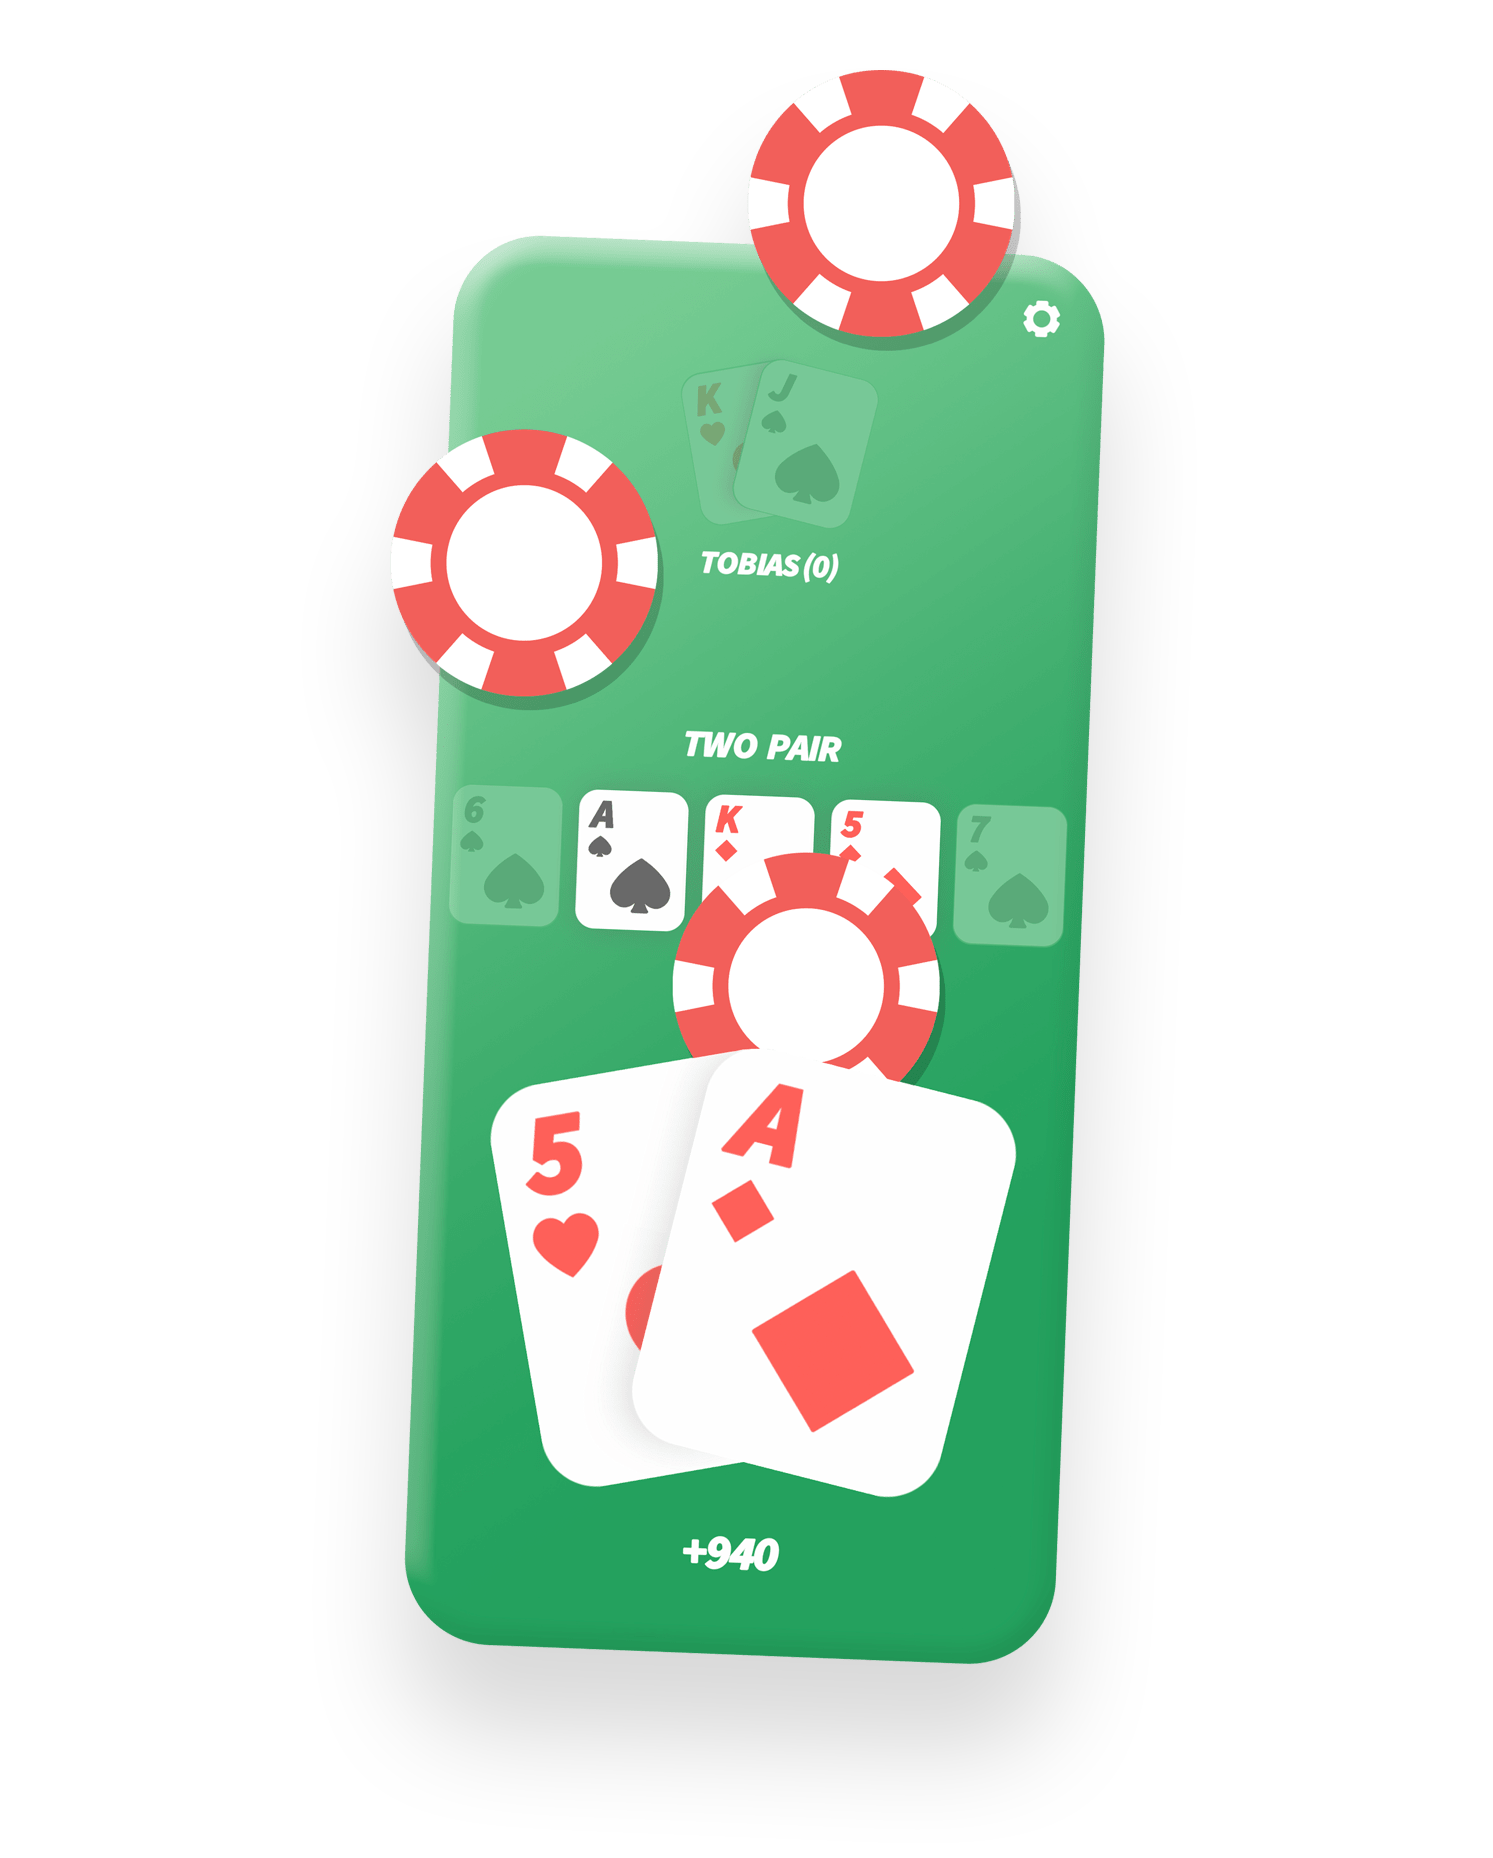 Poker with friends app online live